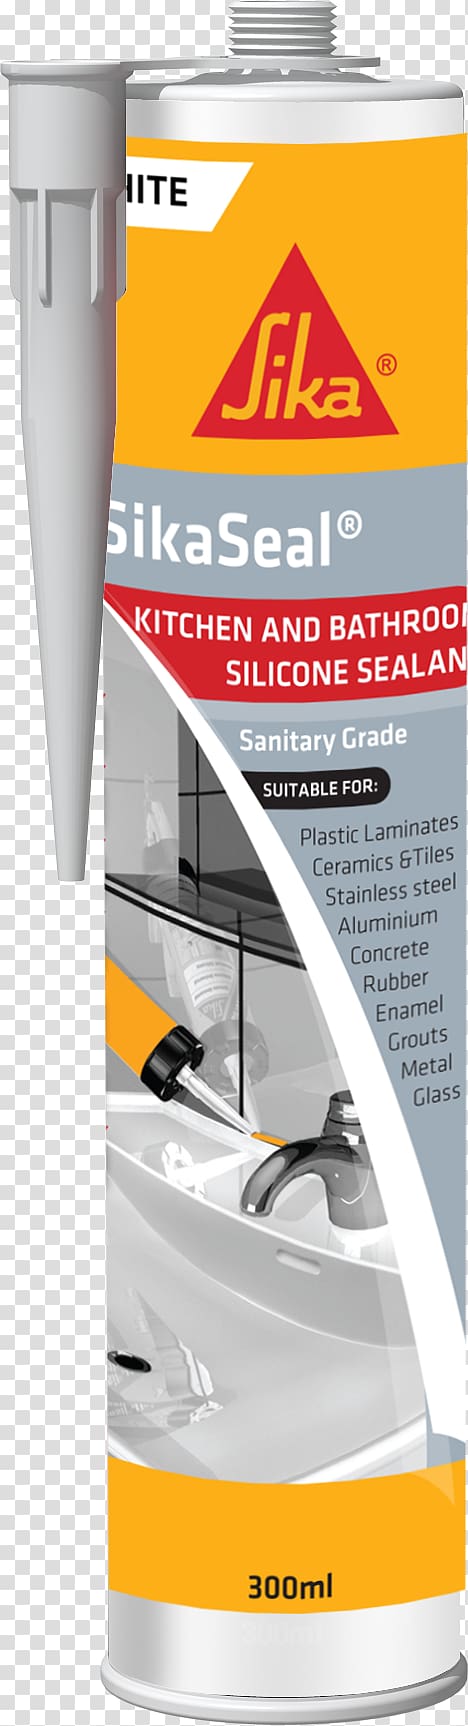 Sika AG Building Materials Sealant Waterproofing Room, products renderings transparent background PNG clipart